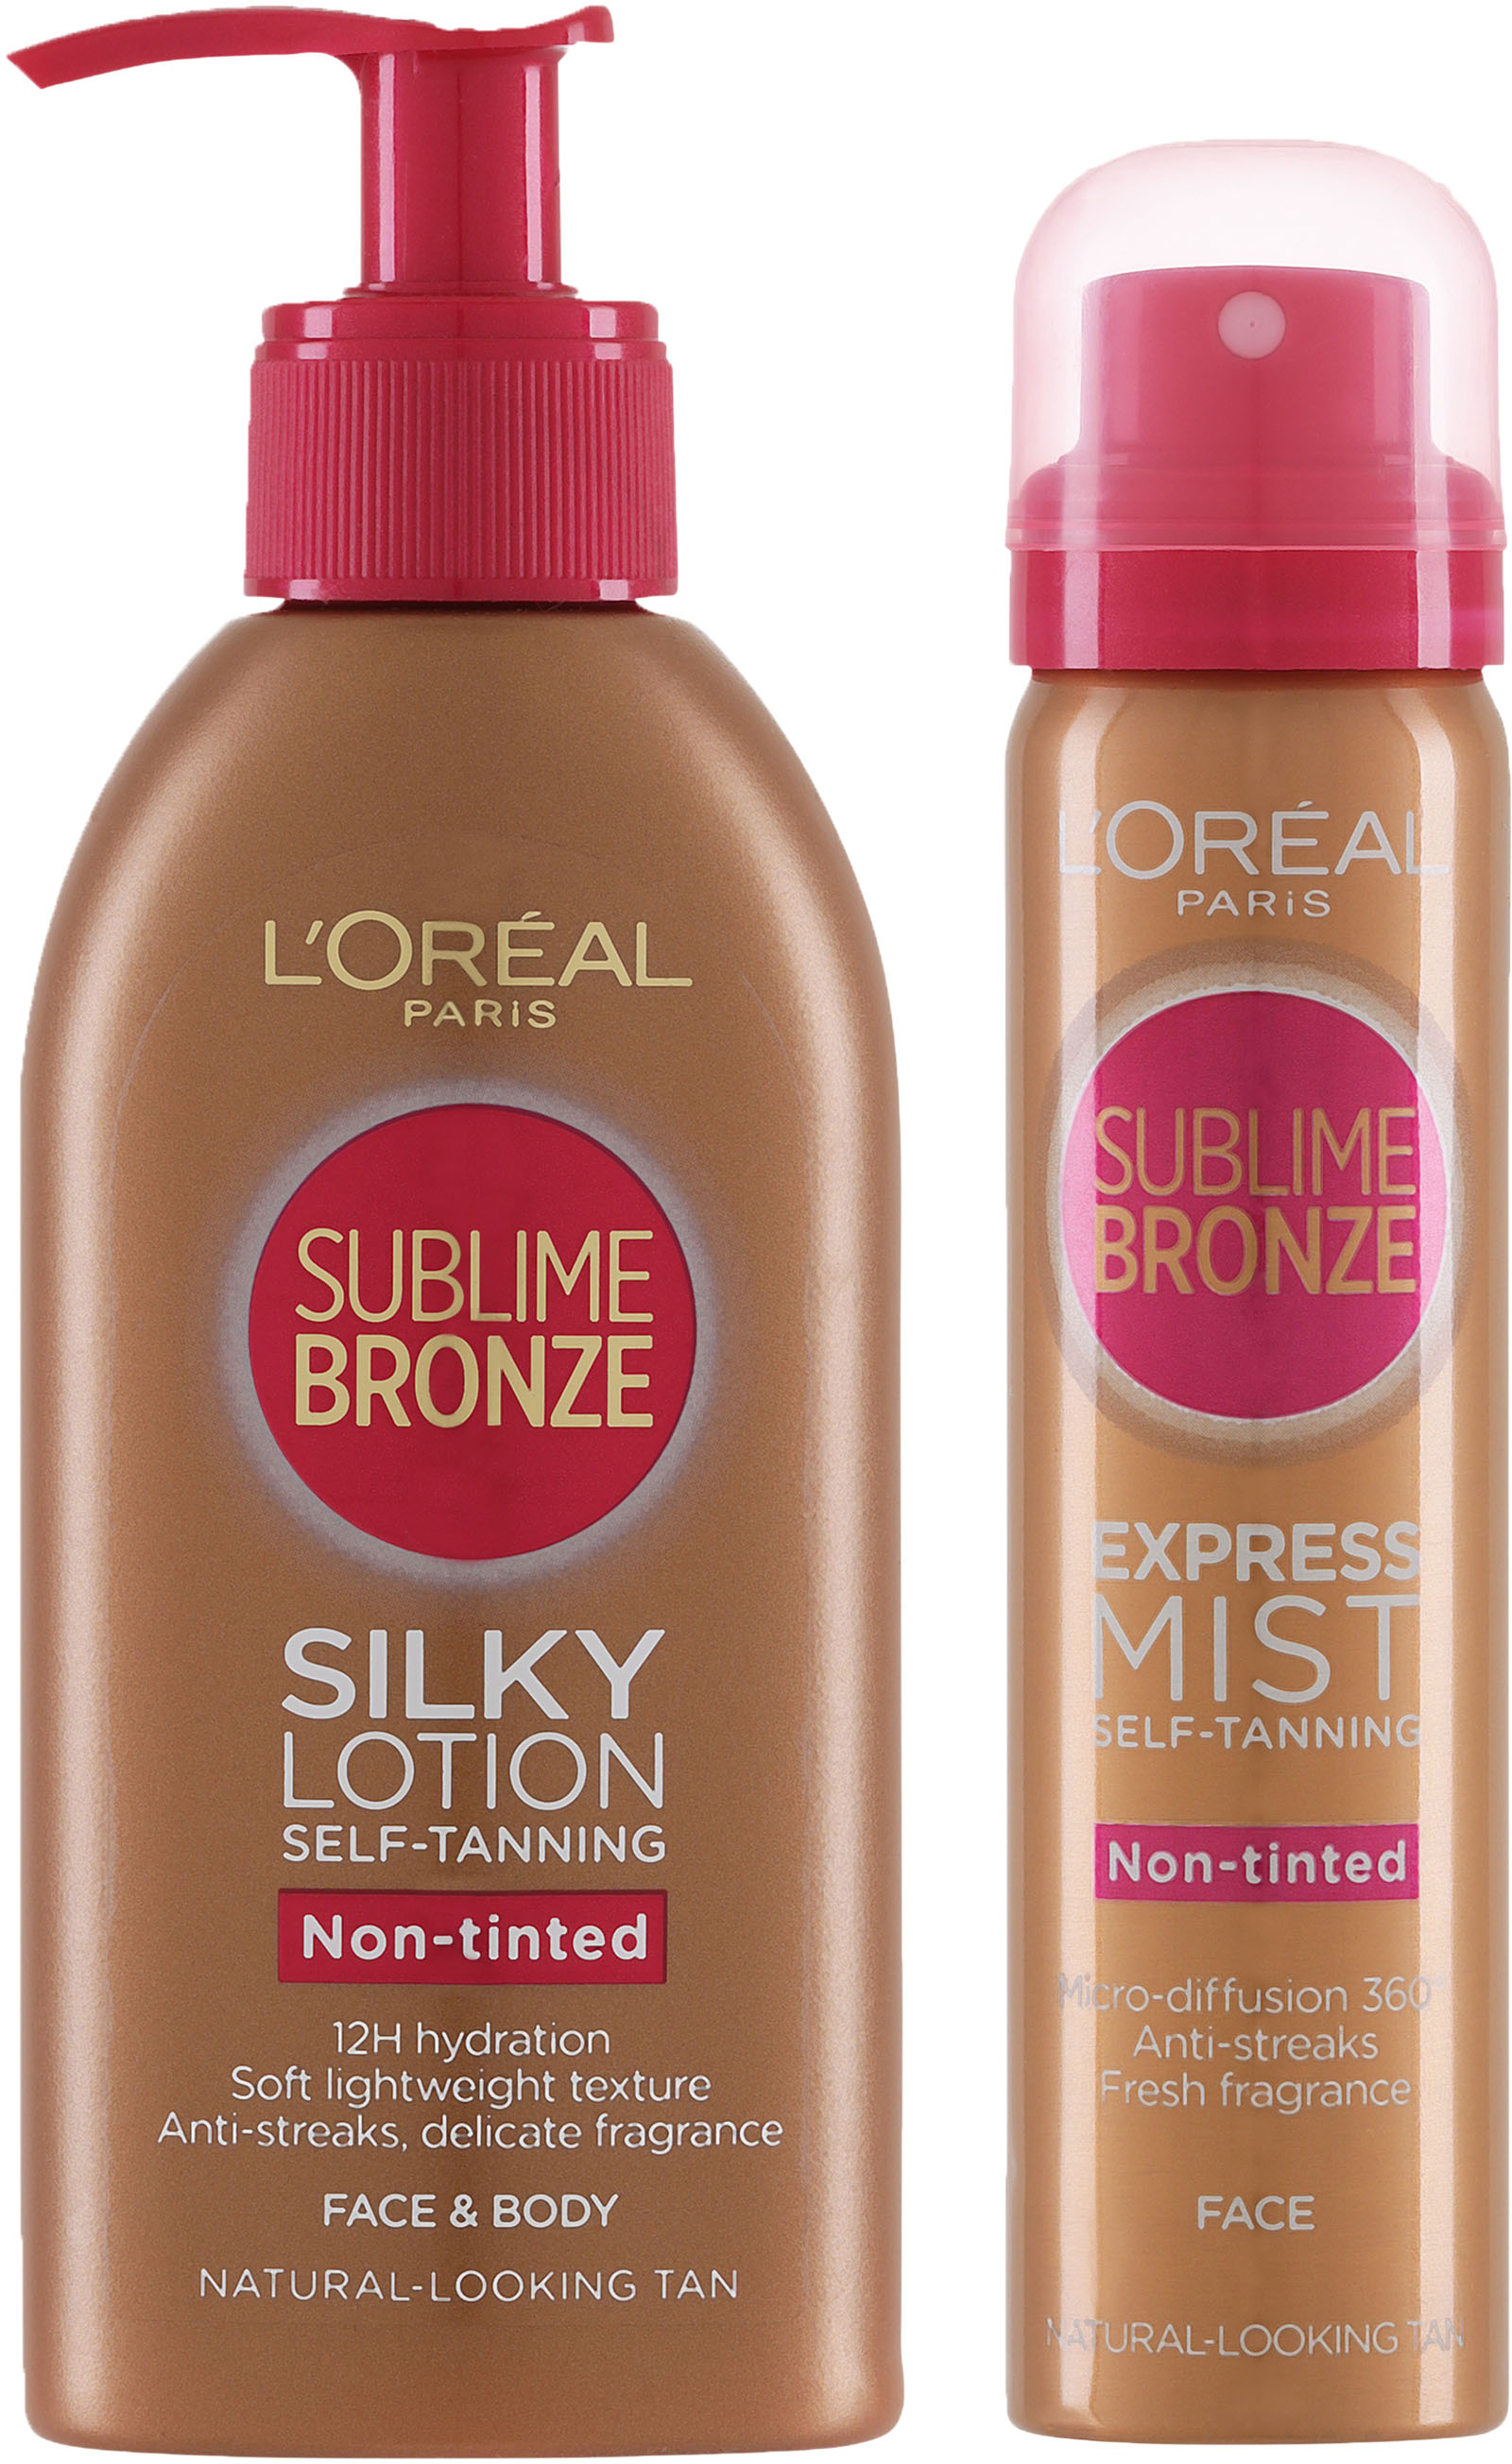 Loreal Paris Sublime Bronze Face And Body Duo